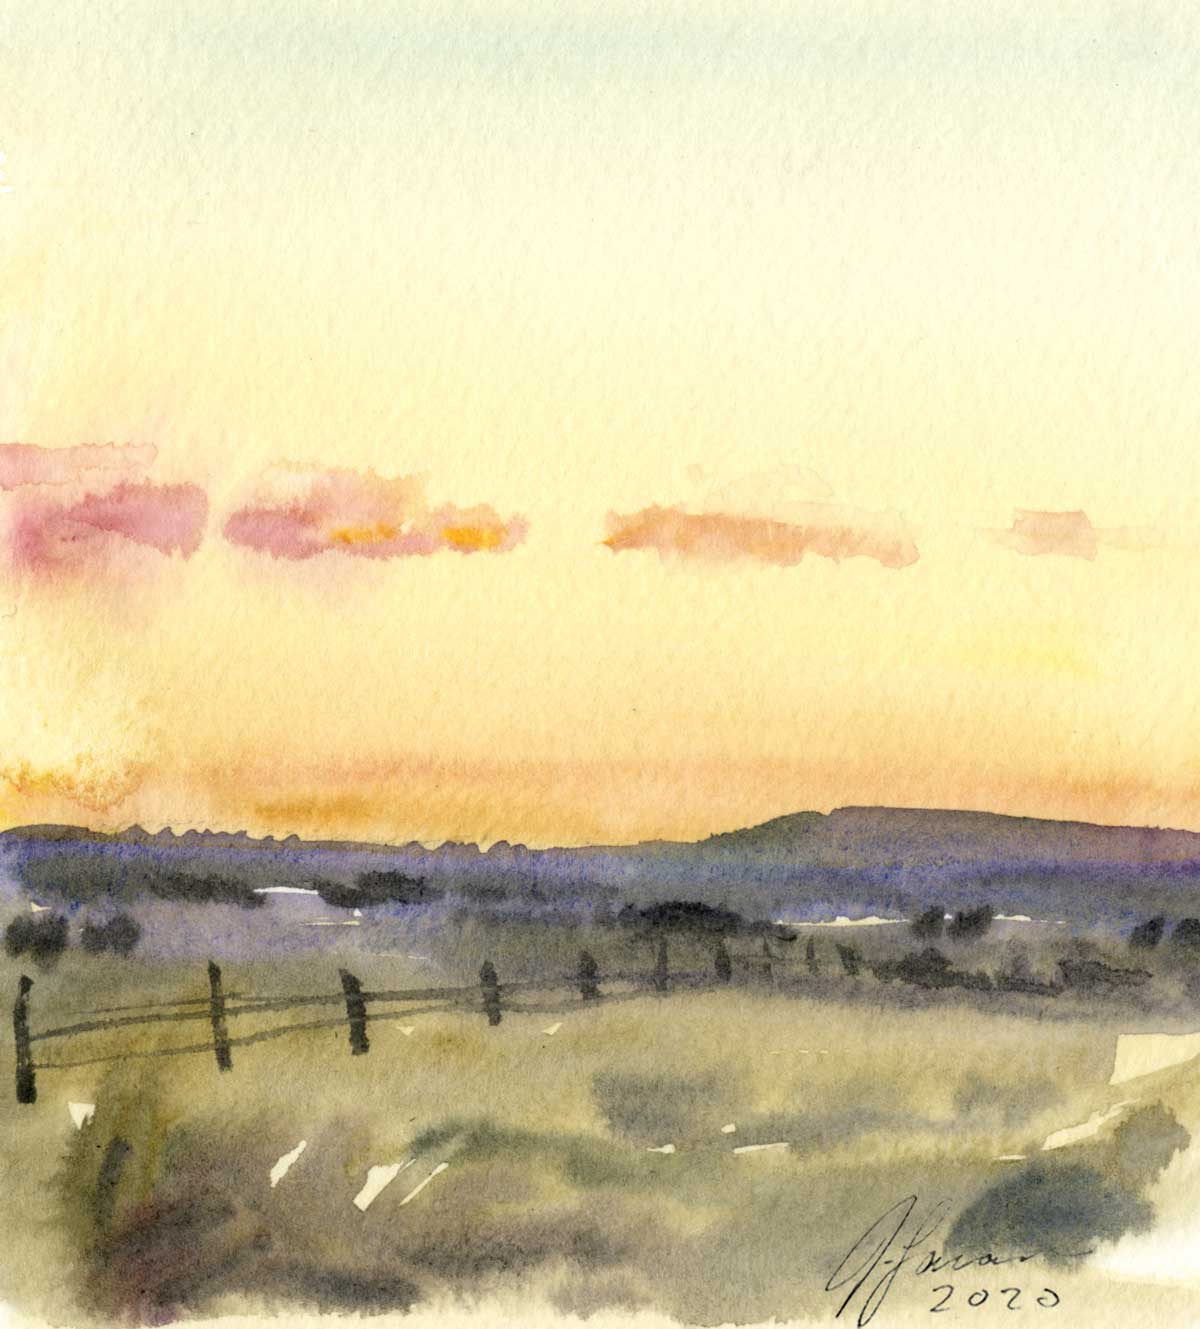 Watercolor sketch of a field and fence with distant ridge beneath and yellow and orange dawn sky with pink clouds.